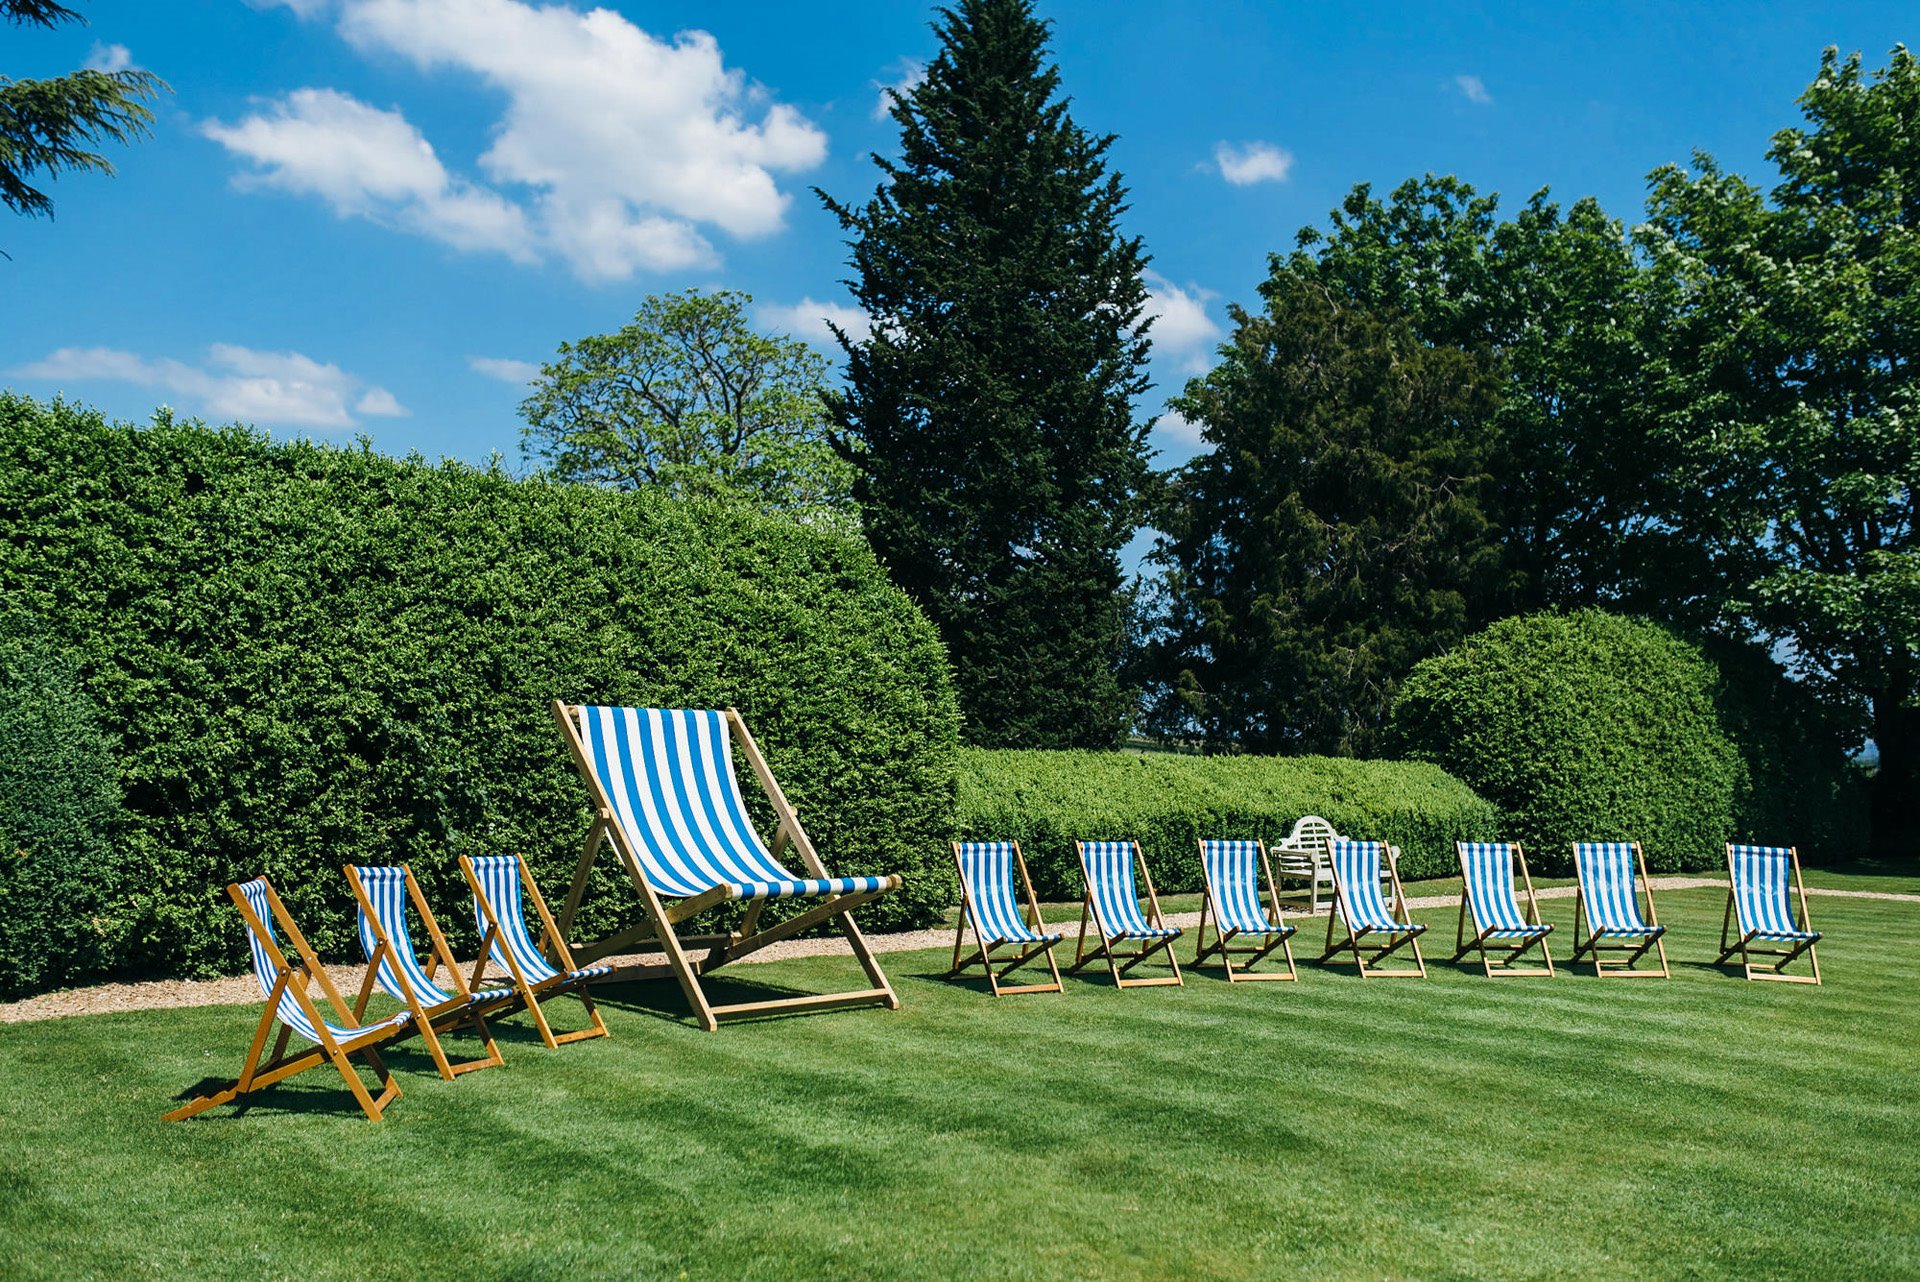 Fun outdoor wedding striped decor deckchairs with a huge one in the middle